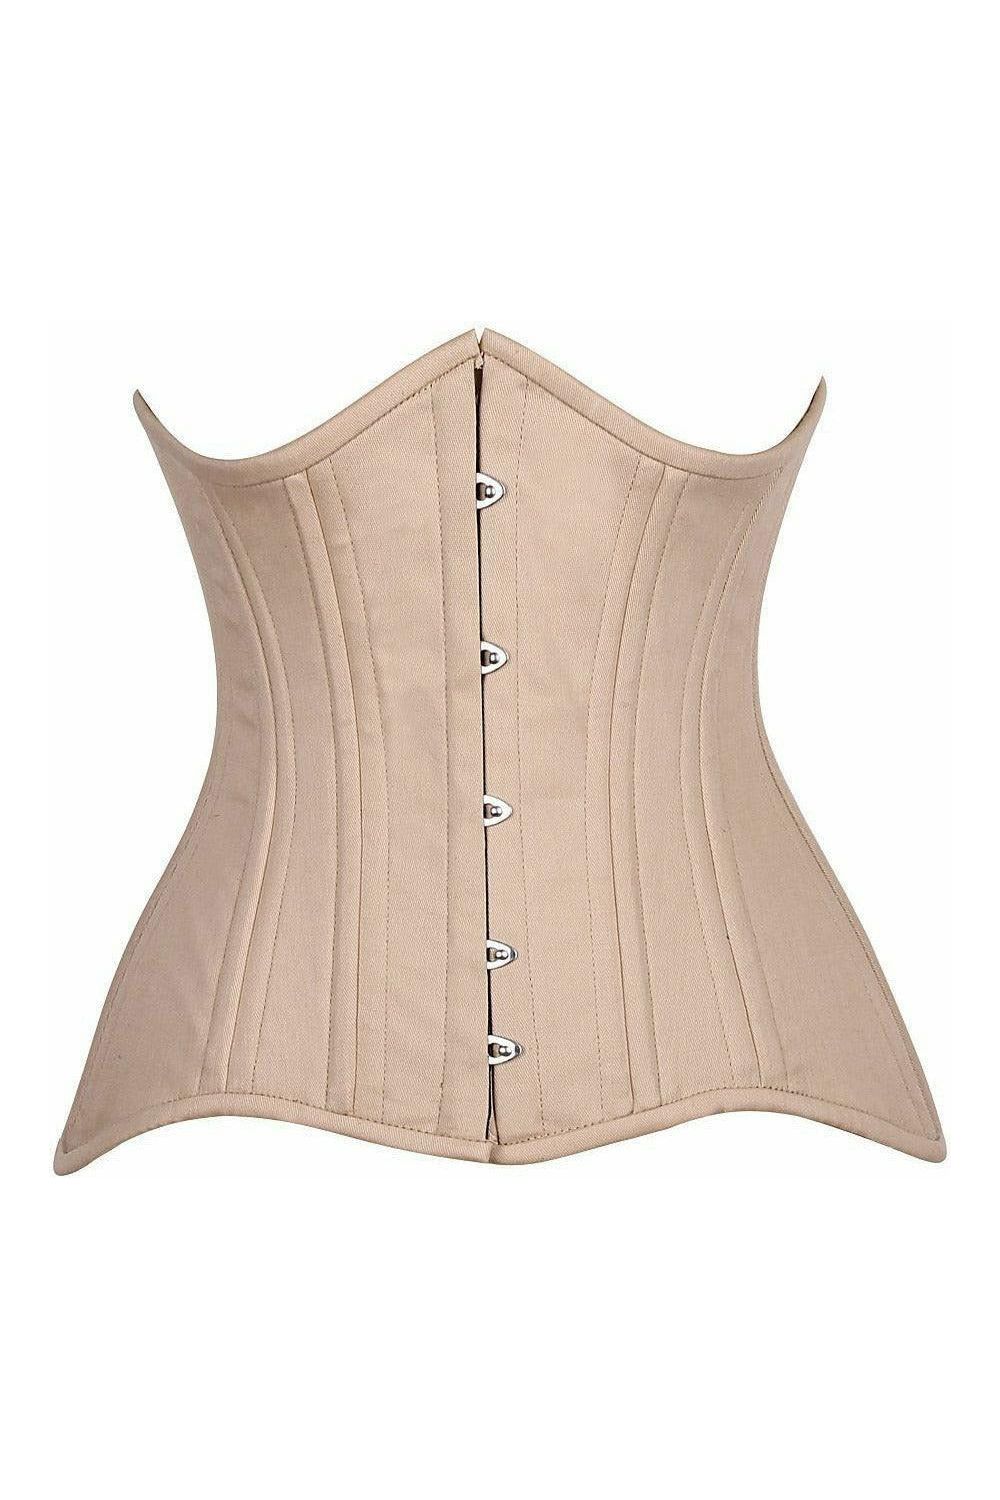 Daisy Corsets Top Drawer CURVY Nude Cotton Double Steel Boned